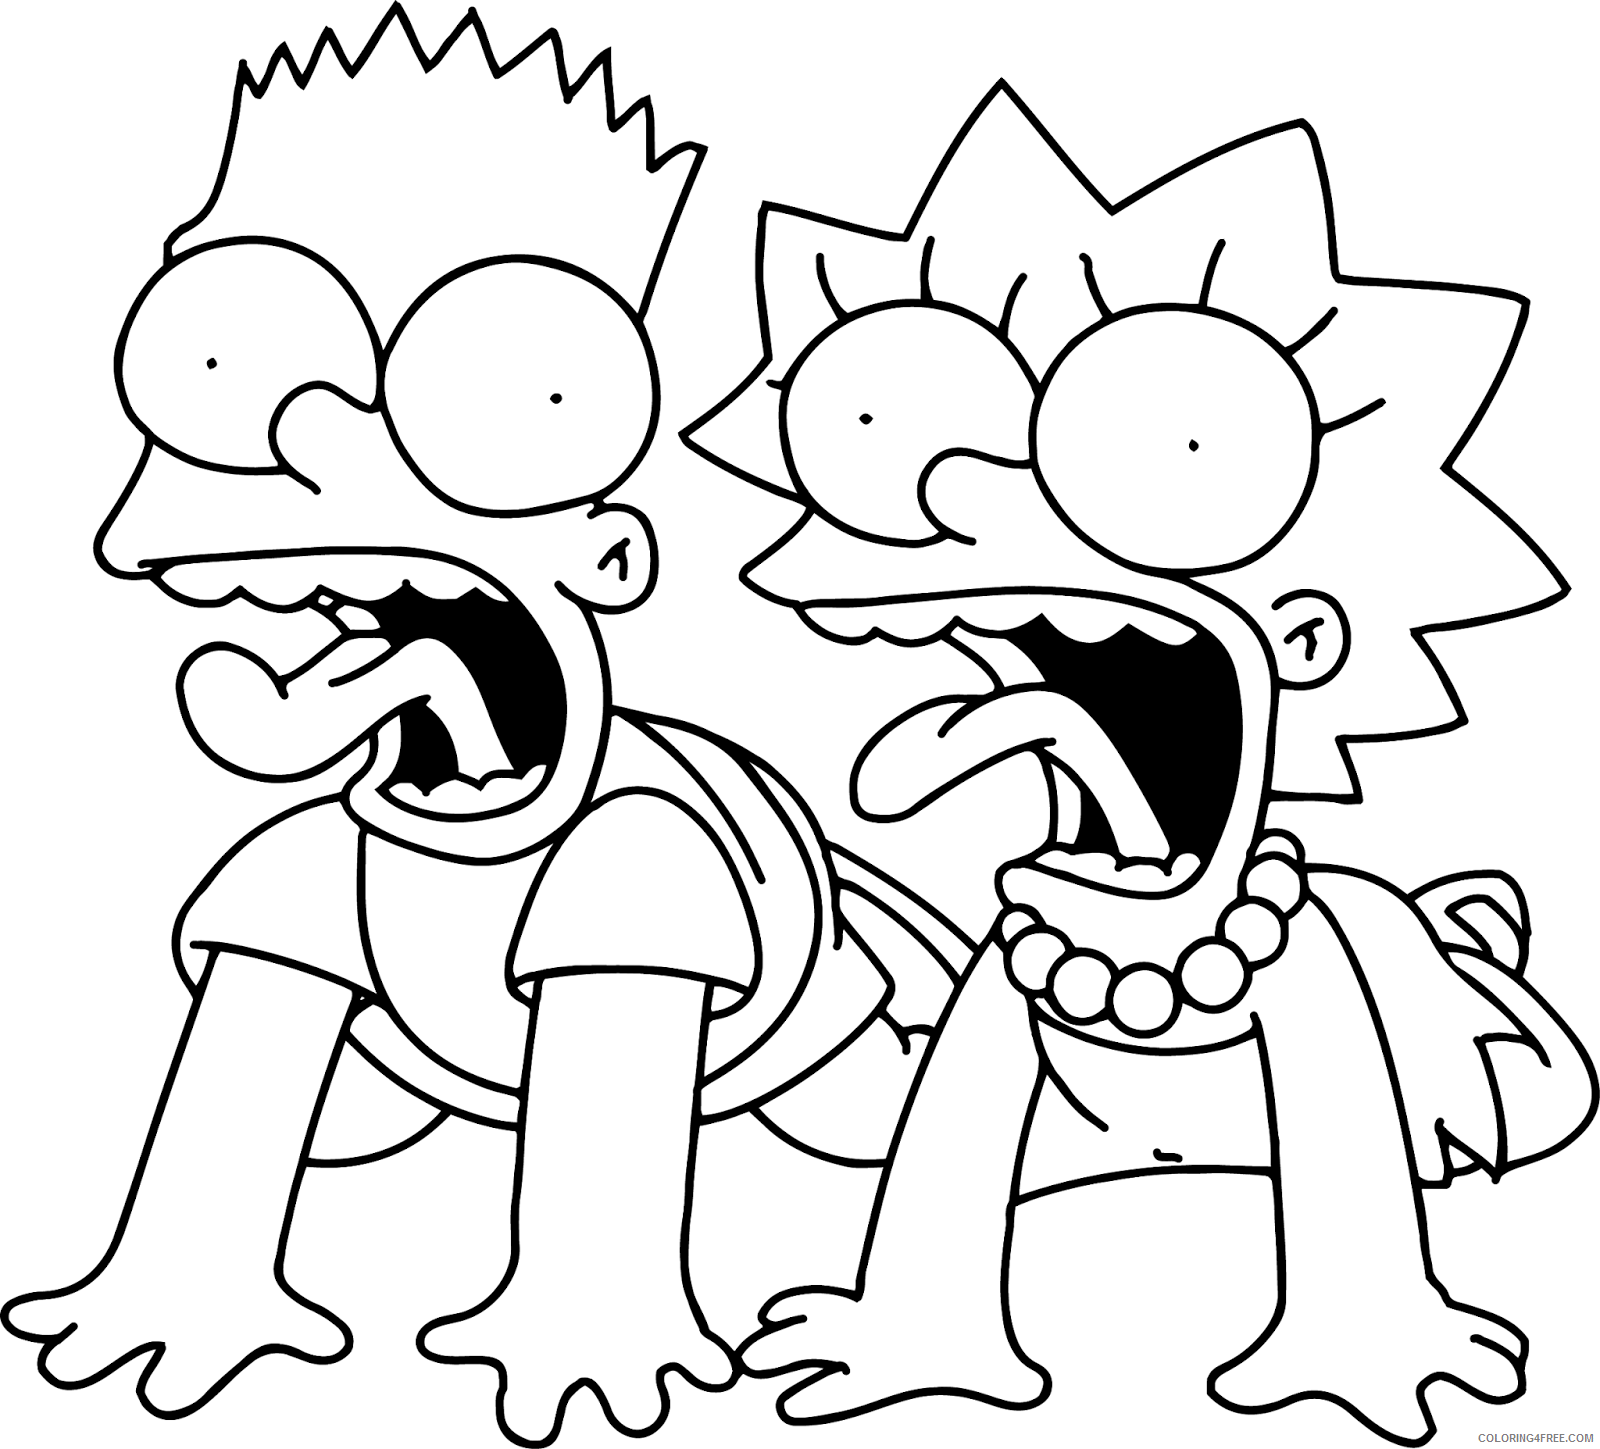 The Simpsons Coloring Pages TV Film Simpsons for Kids Printable 2020 09610 Coloring4free